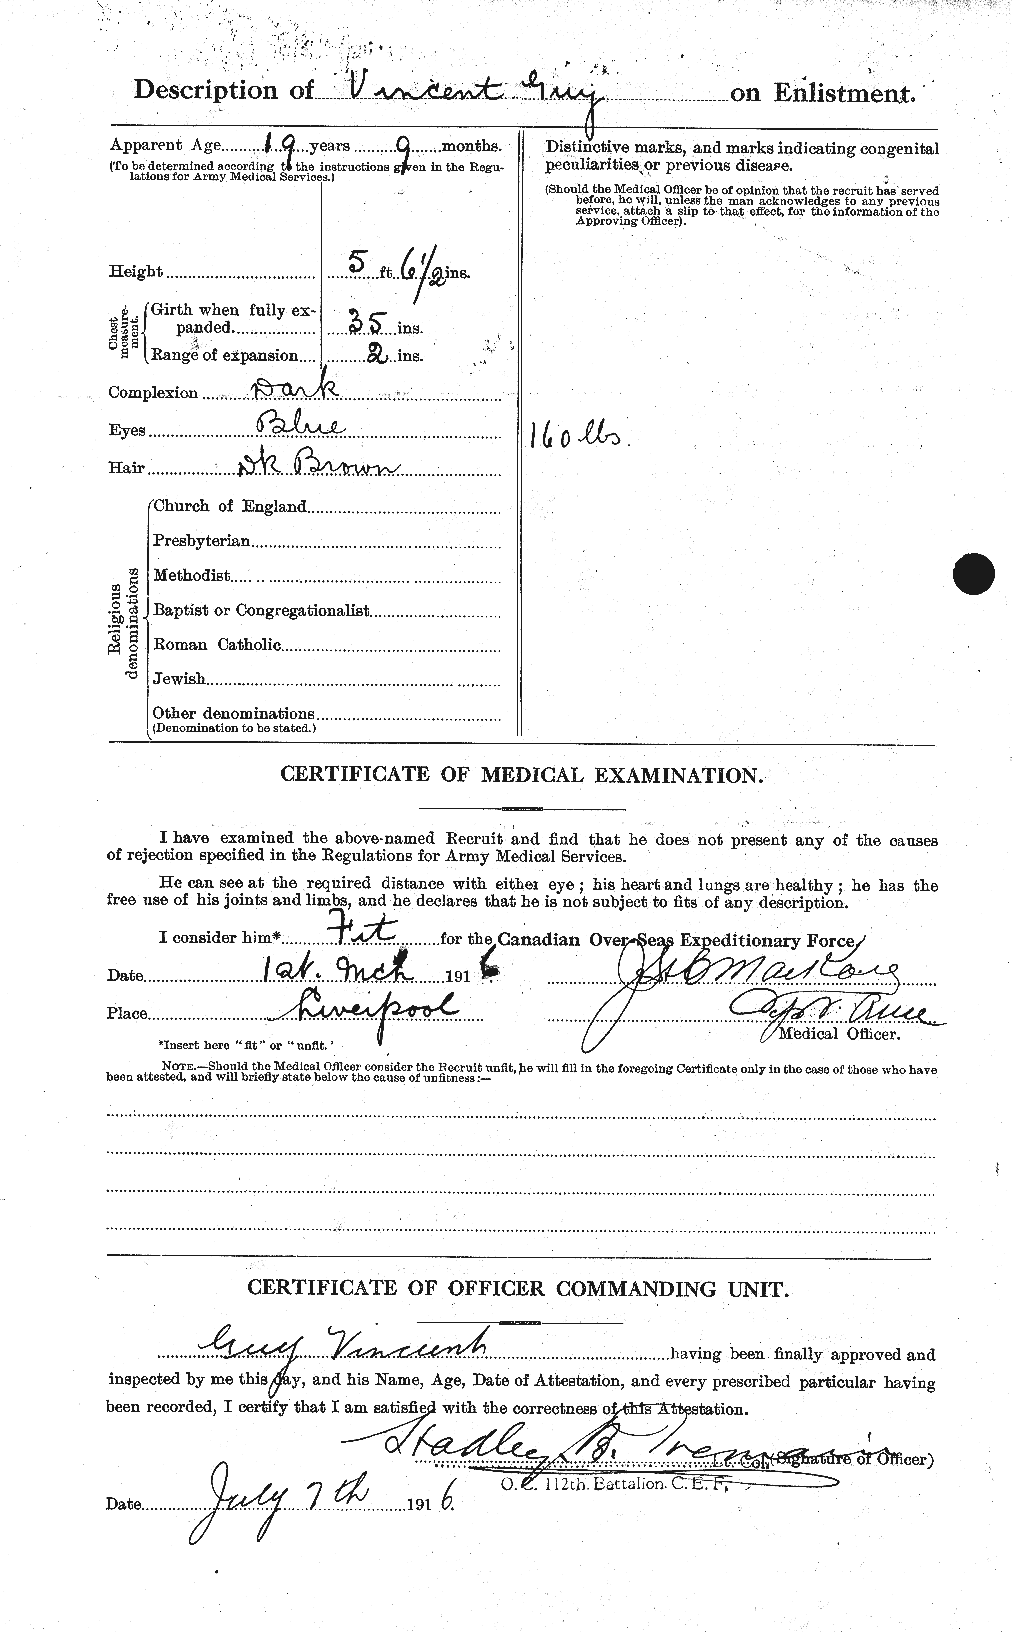 Personnel Records of the First World War - CEF 367294b